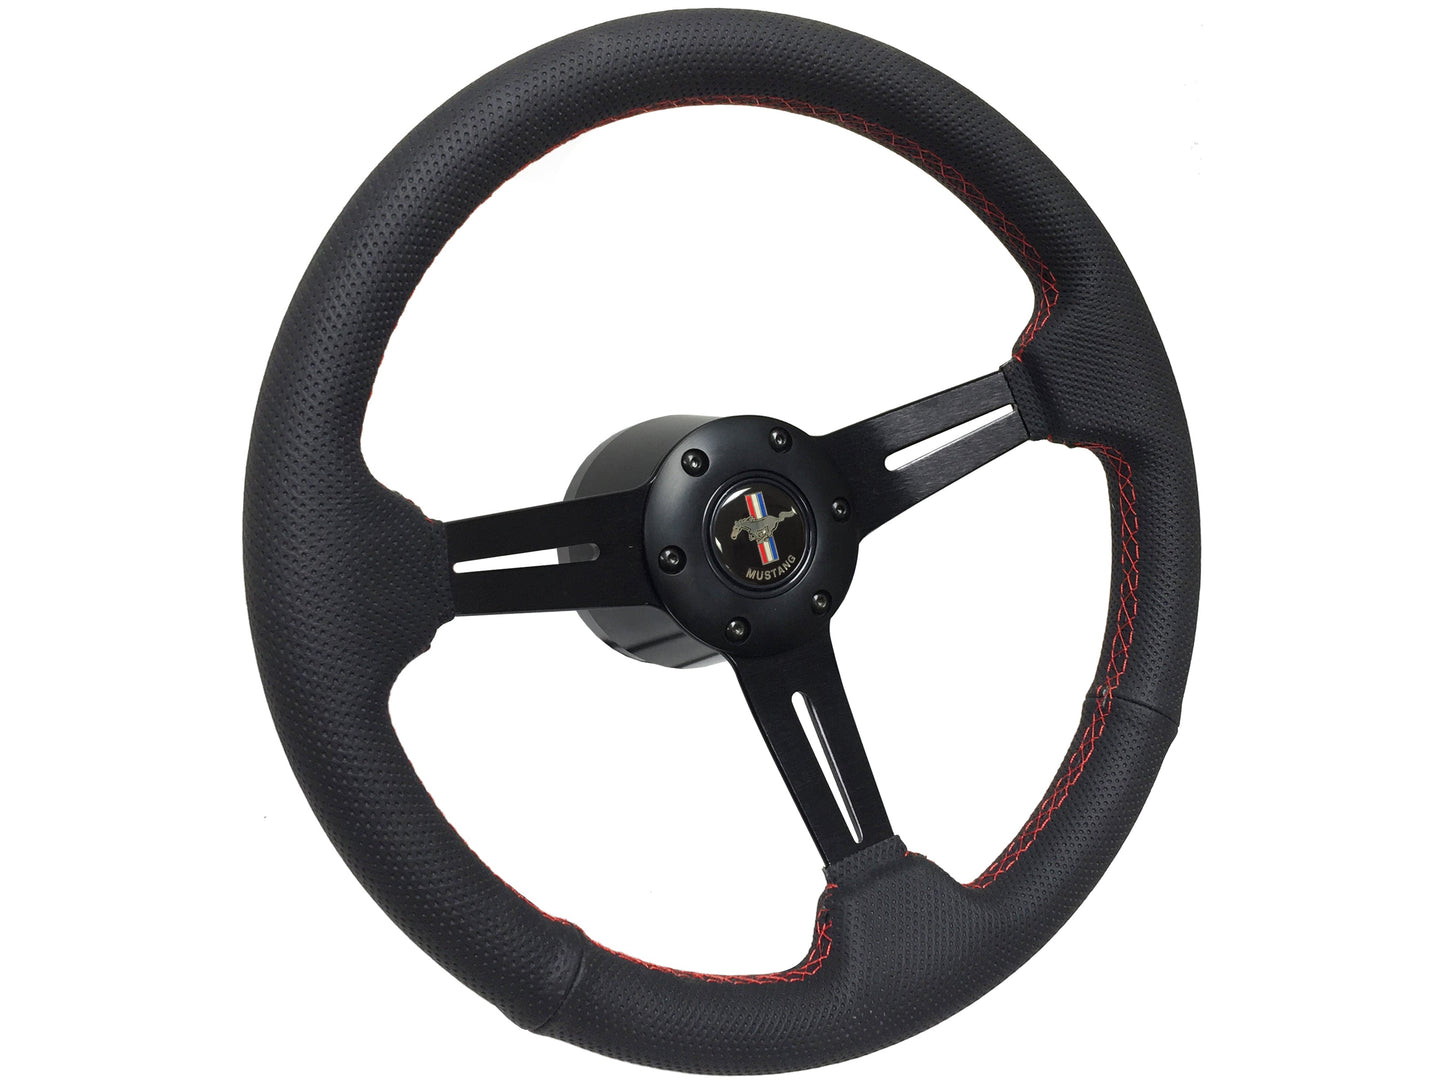 1978-91 Ford Bronco Steering Wheel Kit | Perforated Black Leather | ST3586RED